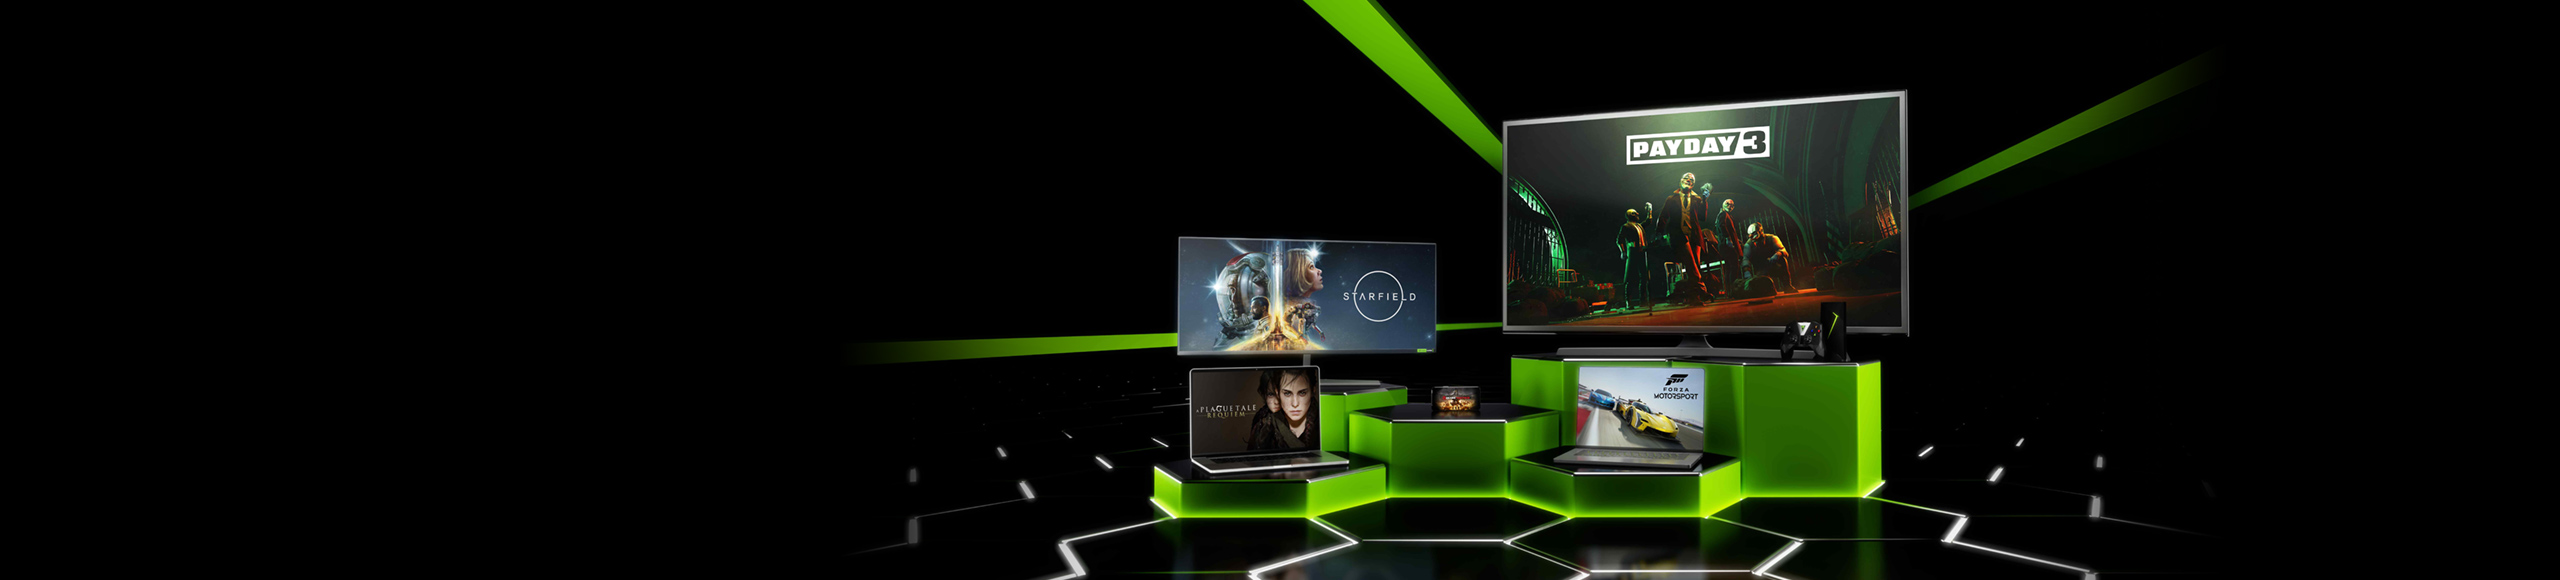 Geforce Now | The Next Generation In Cloud Gaming | Nvidia